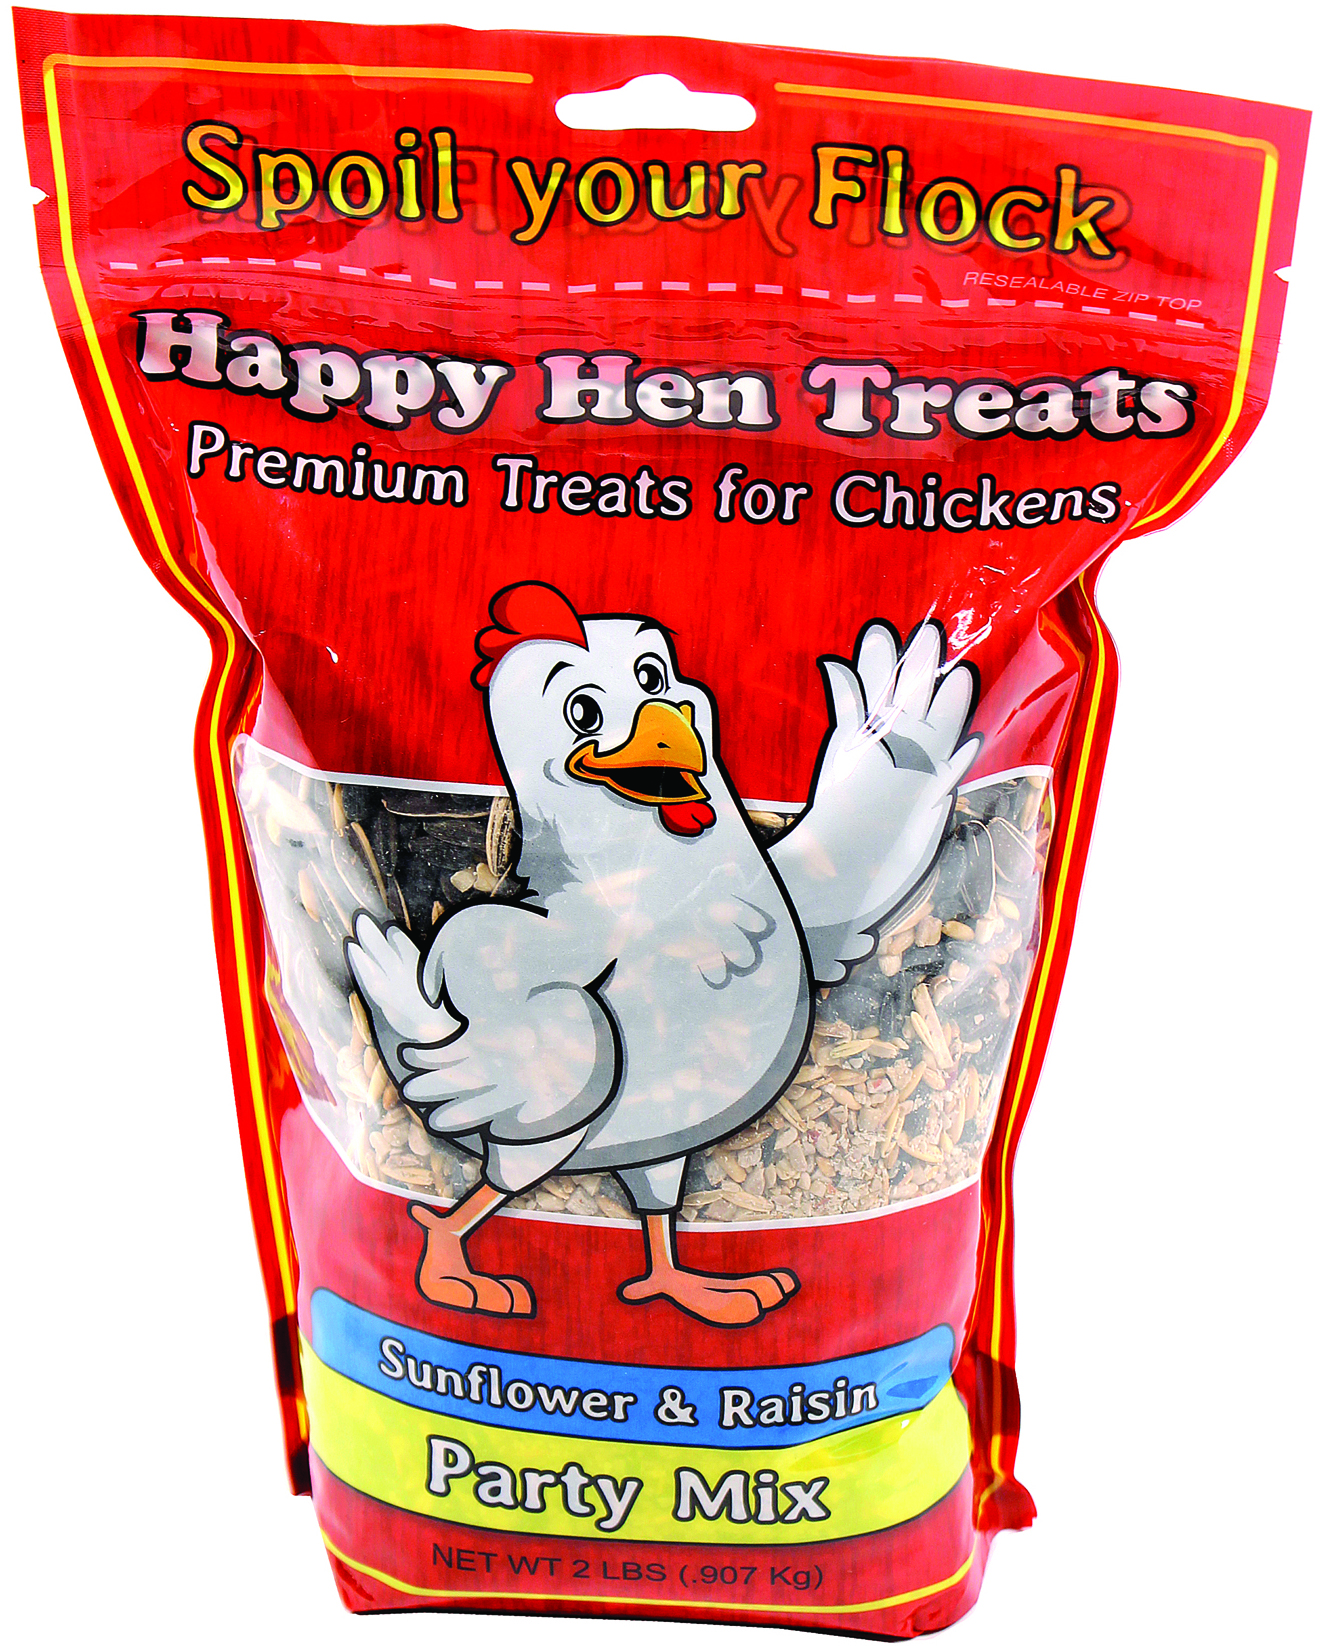 PARTY MIX CHICKEN TREATS